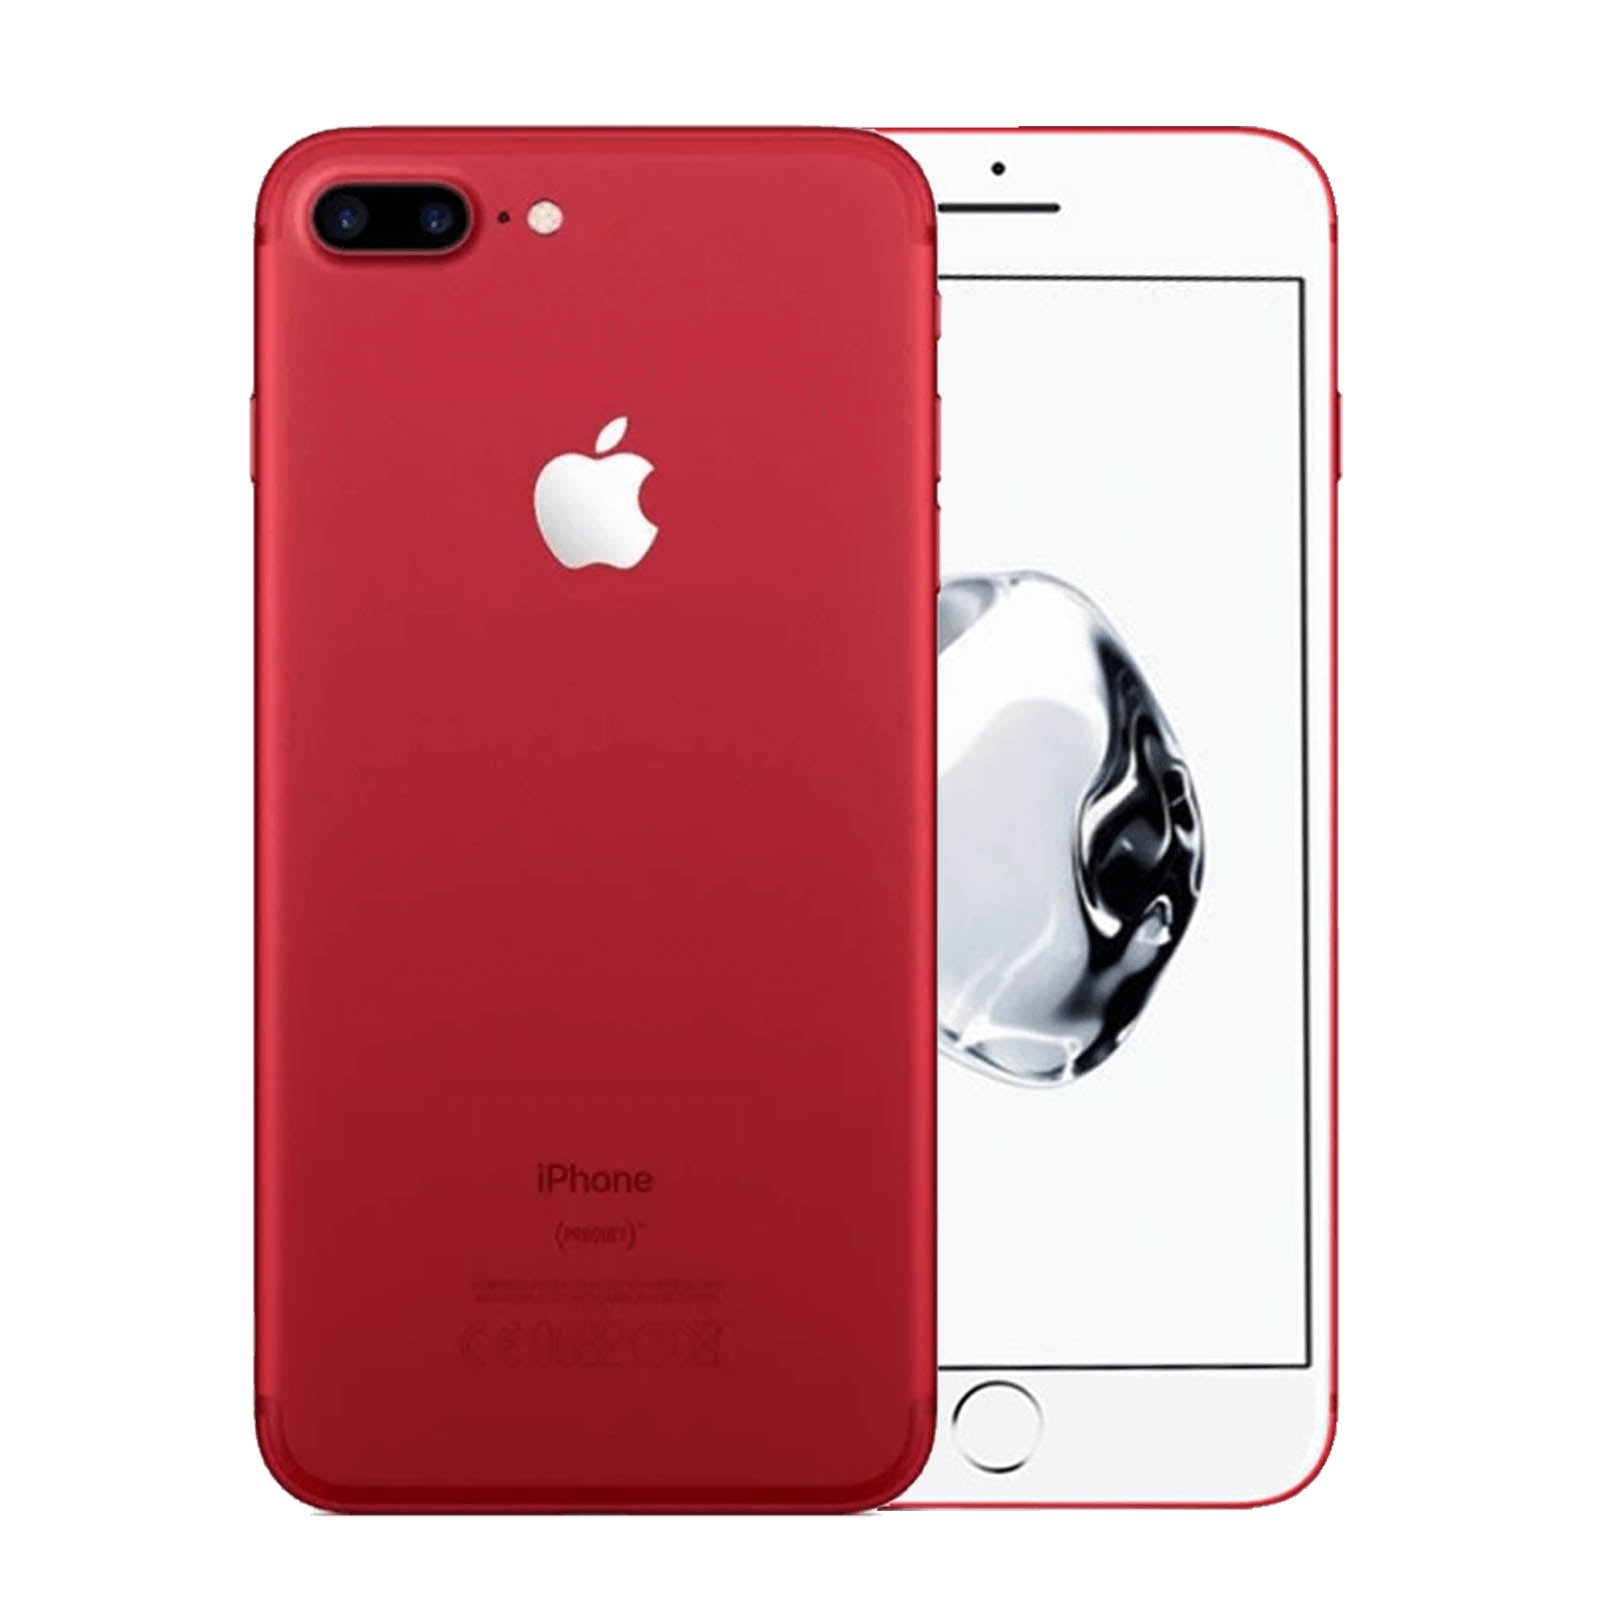 Apple iPhone 7 Plus 256GB Product Product Red Makellos - Ohne Vertrag